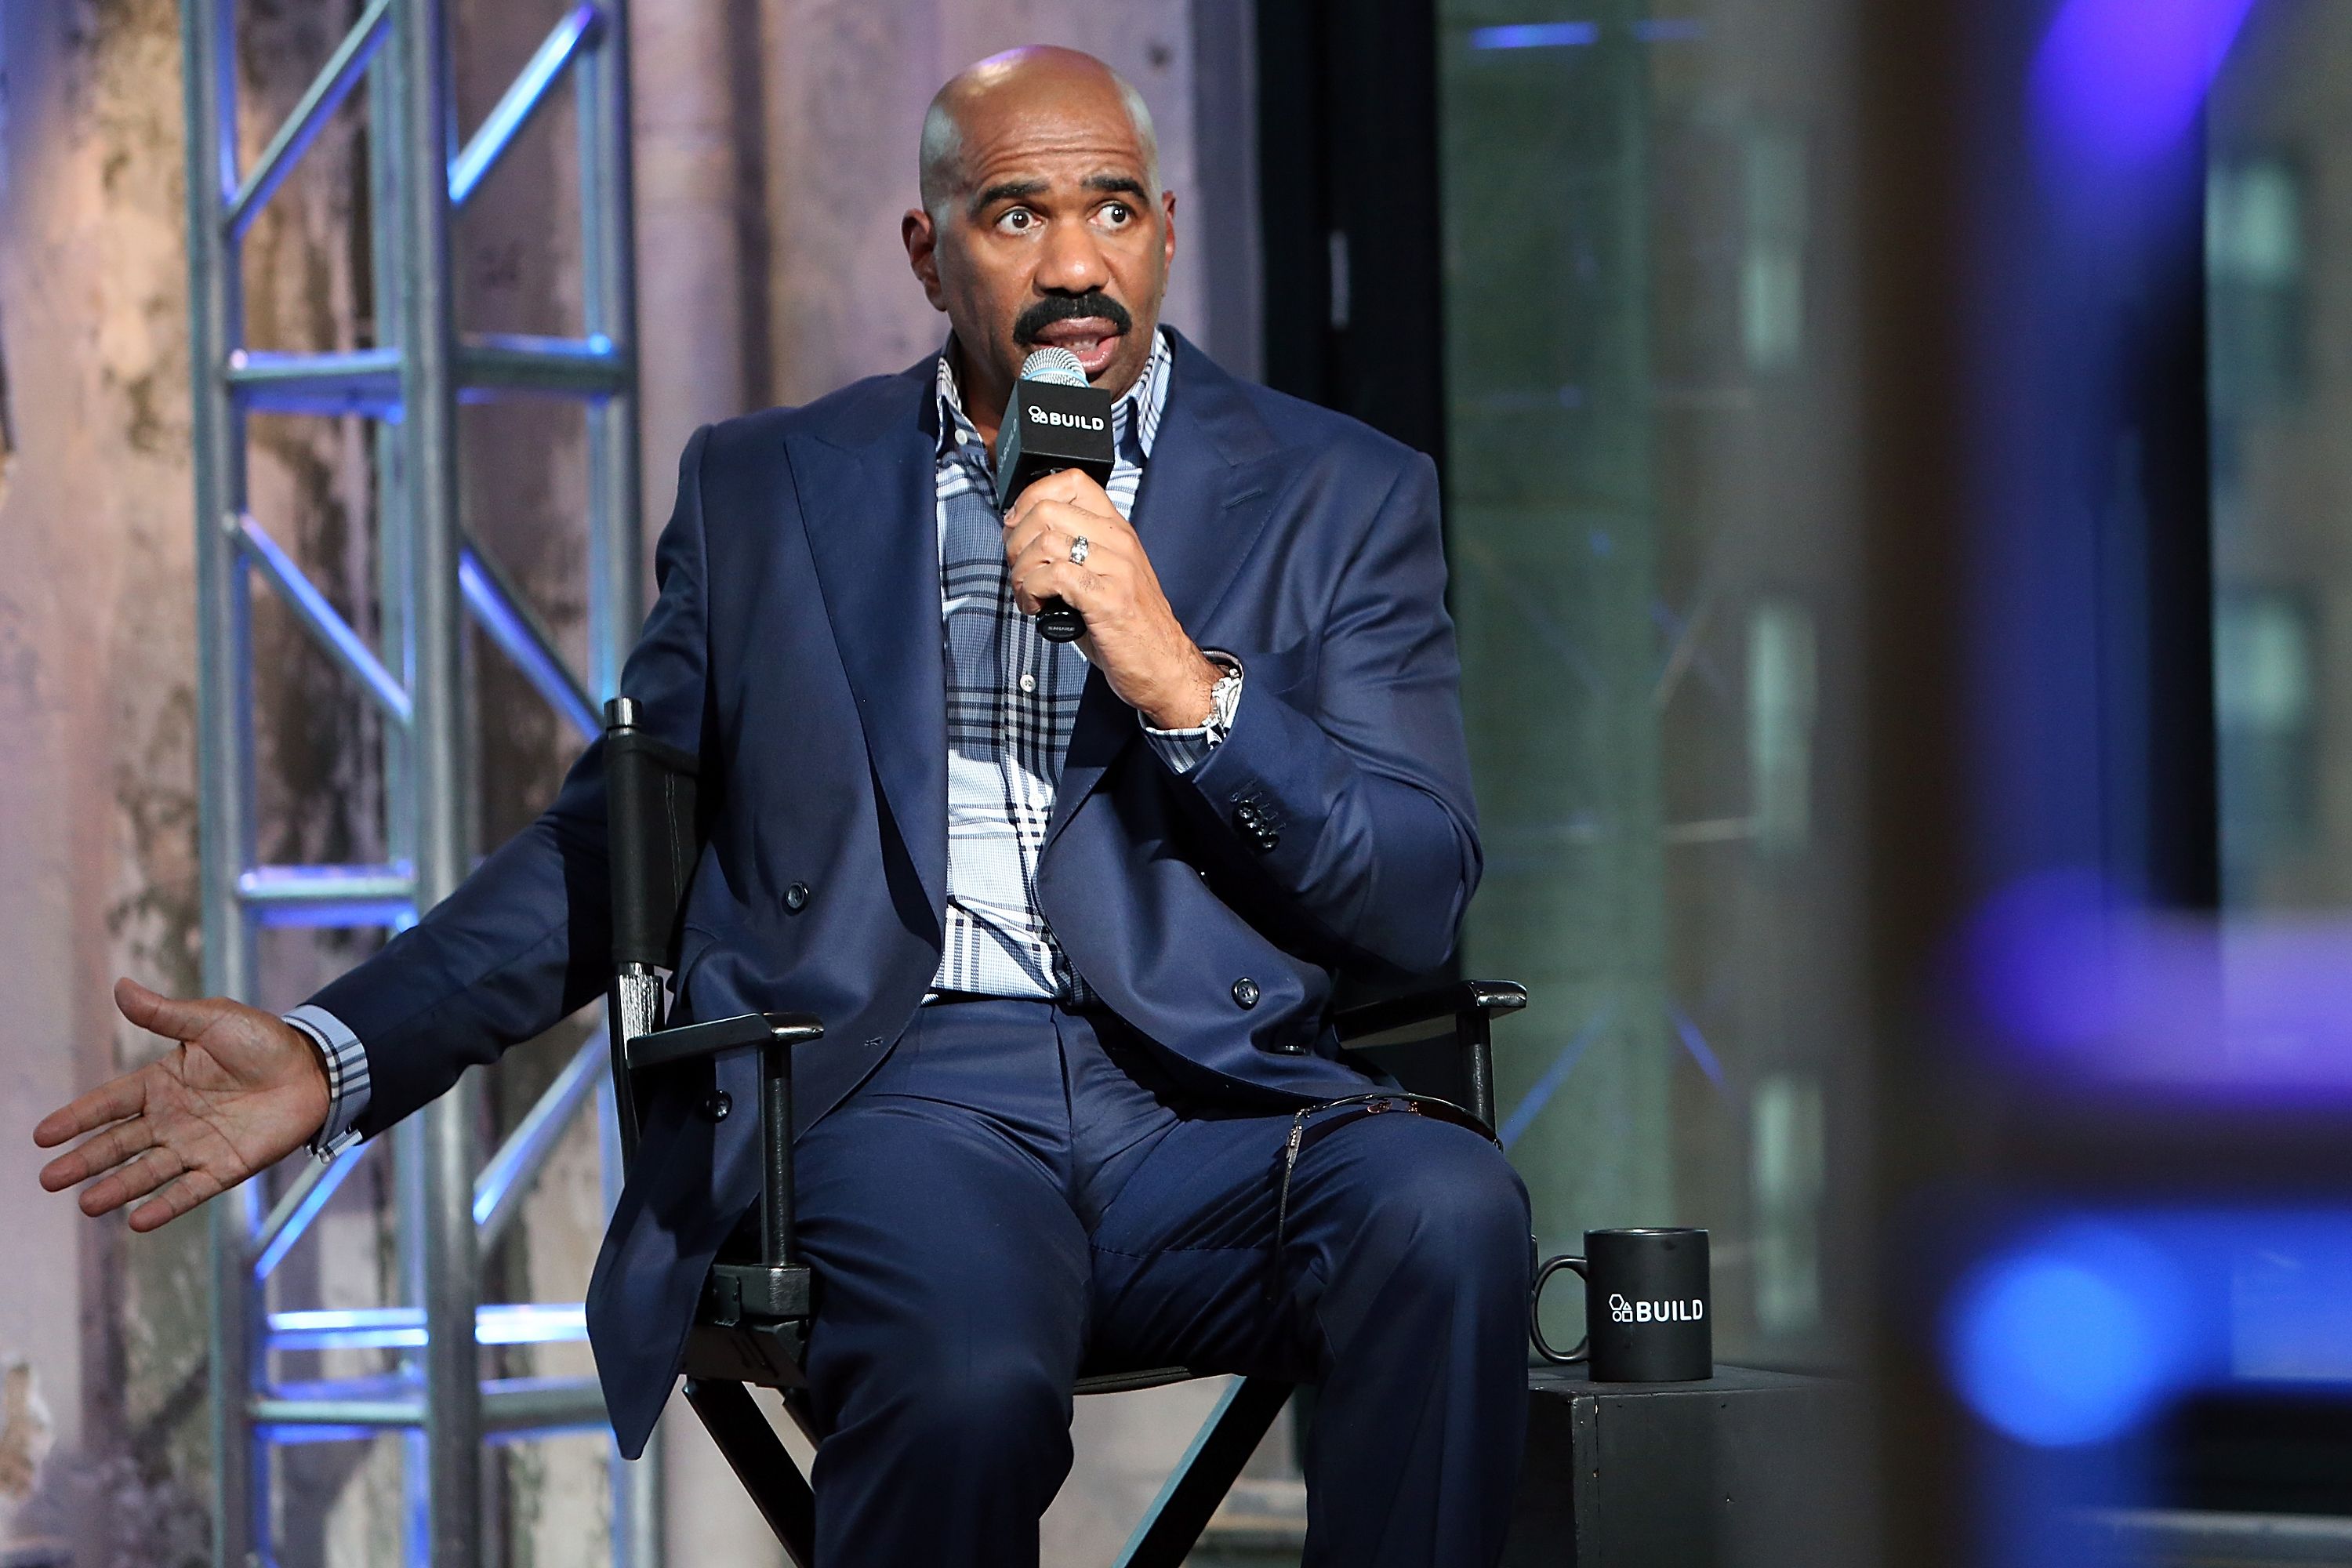 Steve Harvey style moments: Stylist weighs in on green suit